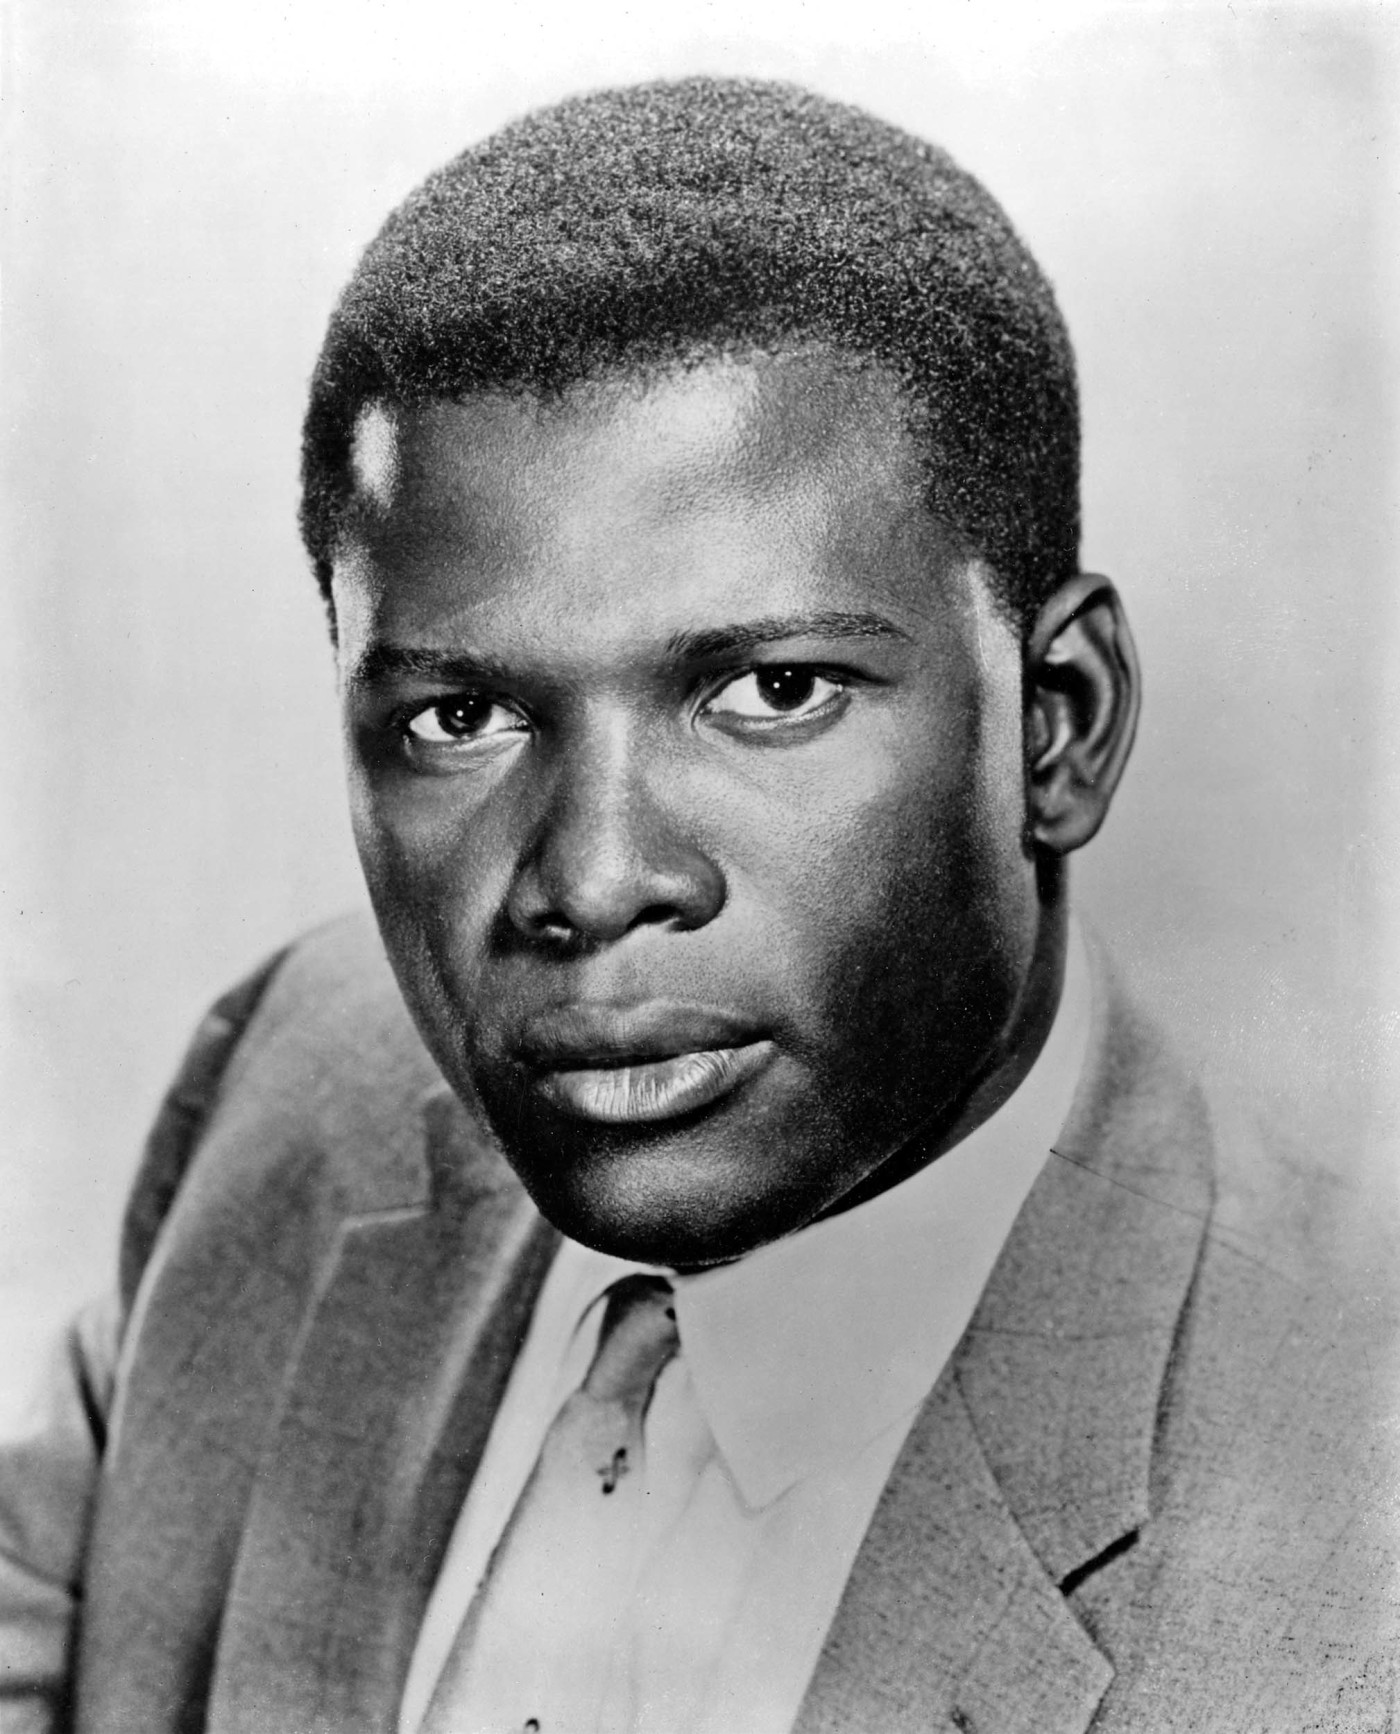 Photograph of Sidney Poitier